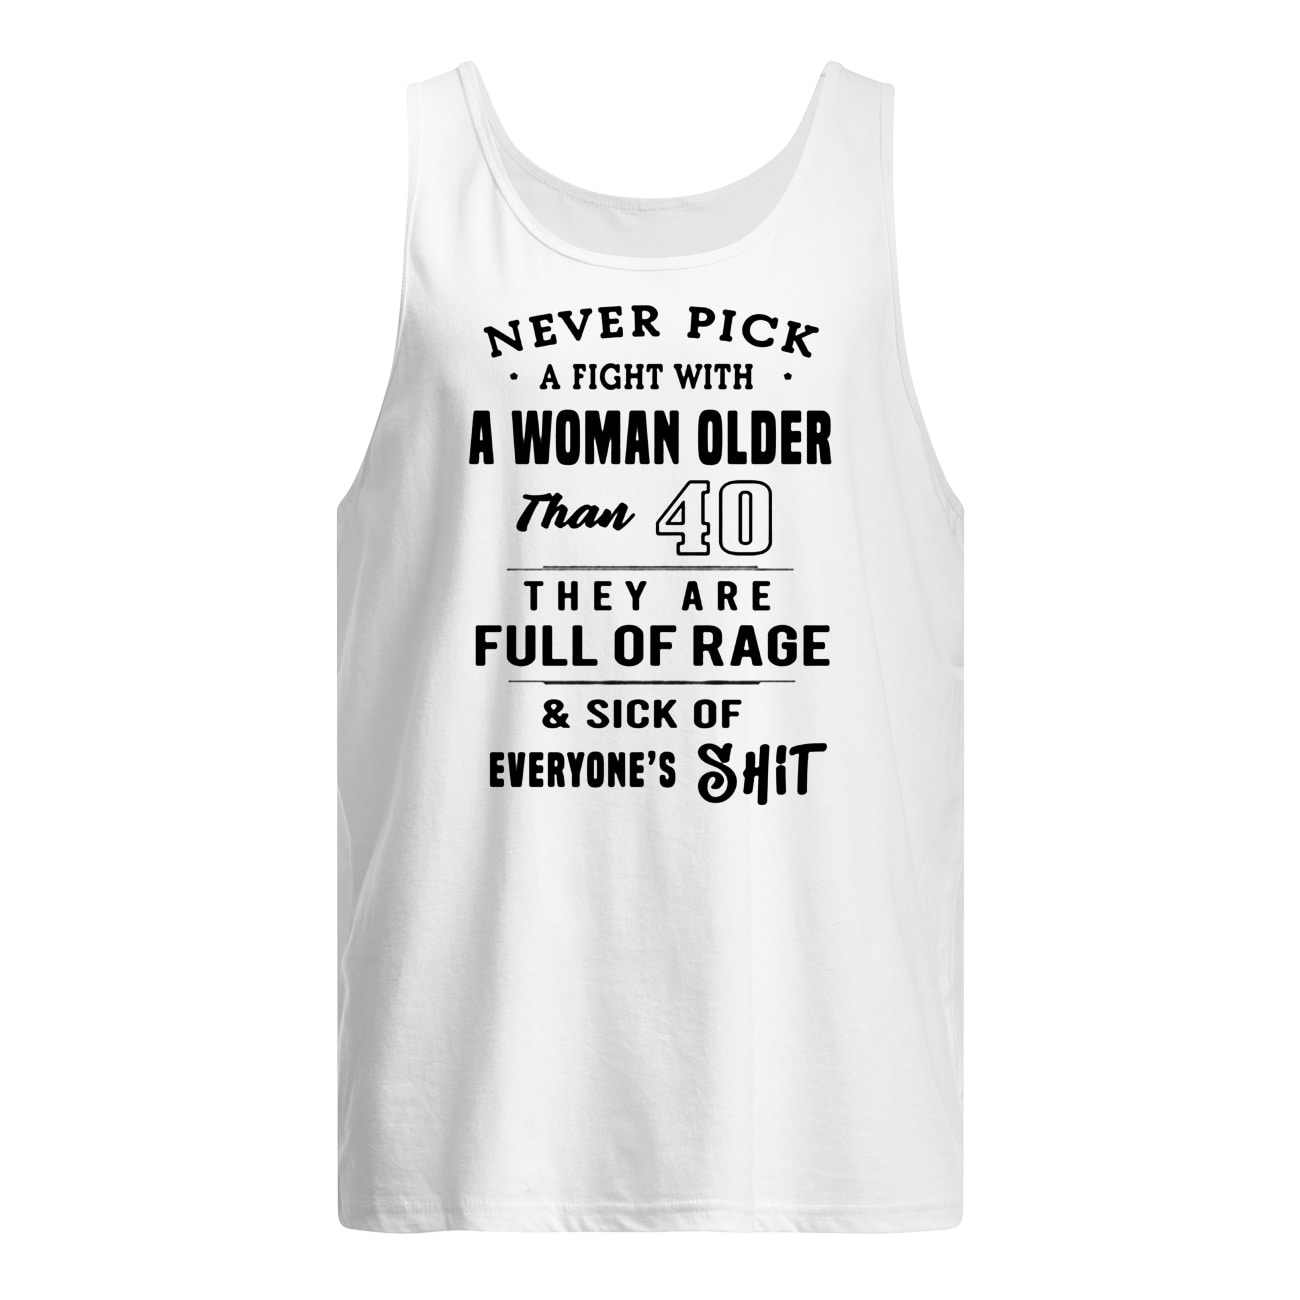 Never pick a fight with a woman older than 40 they are full of rage tank top